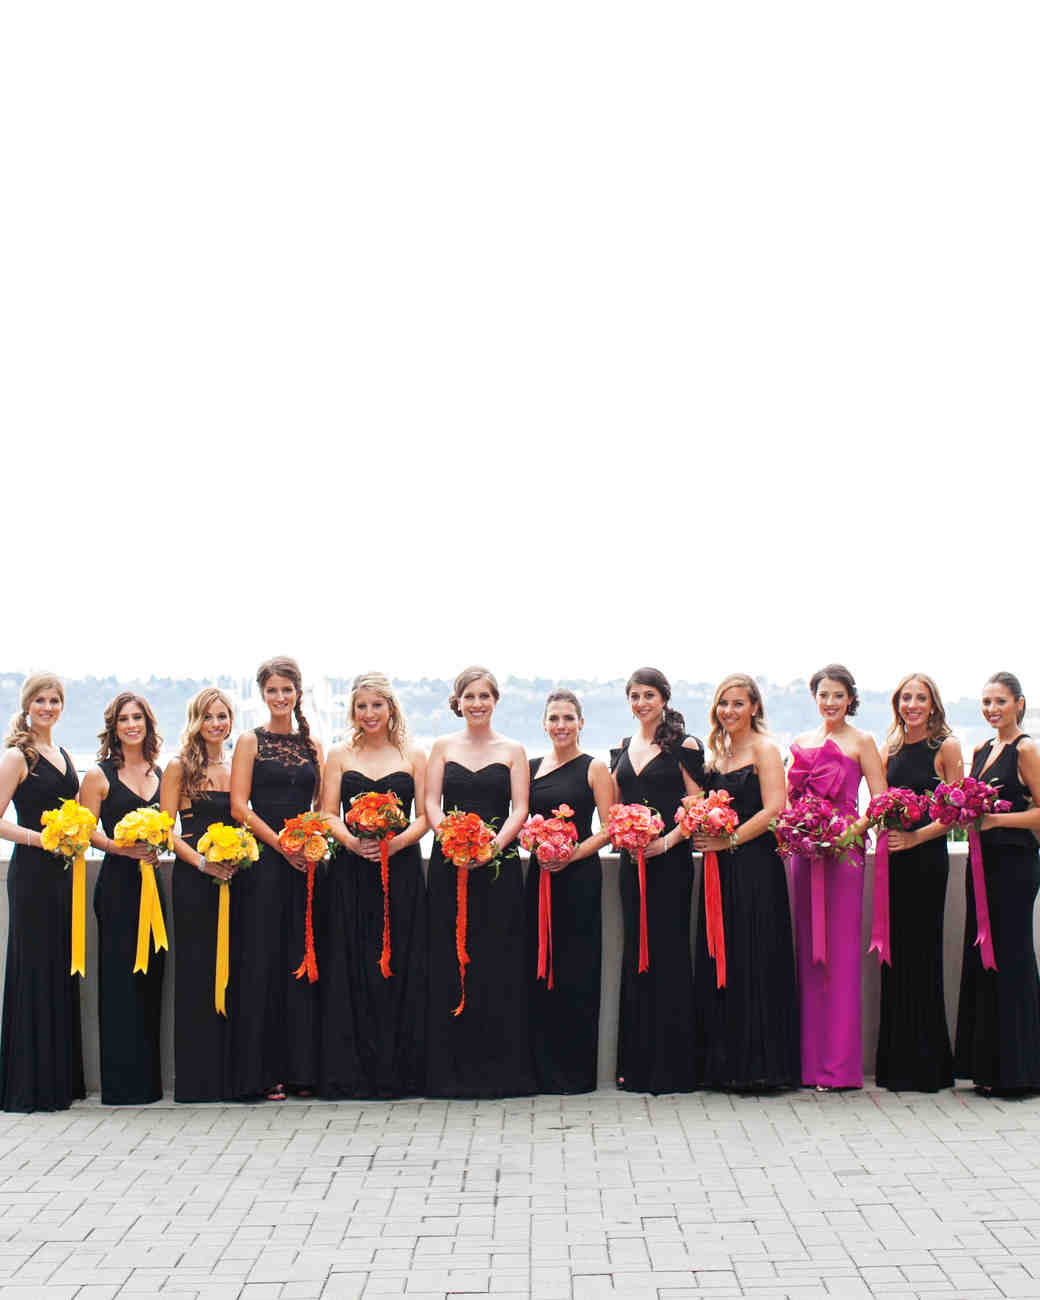 41 Reasons to Love the Mismatched Bridesmaids  Look 